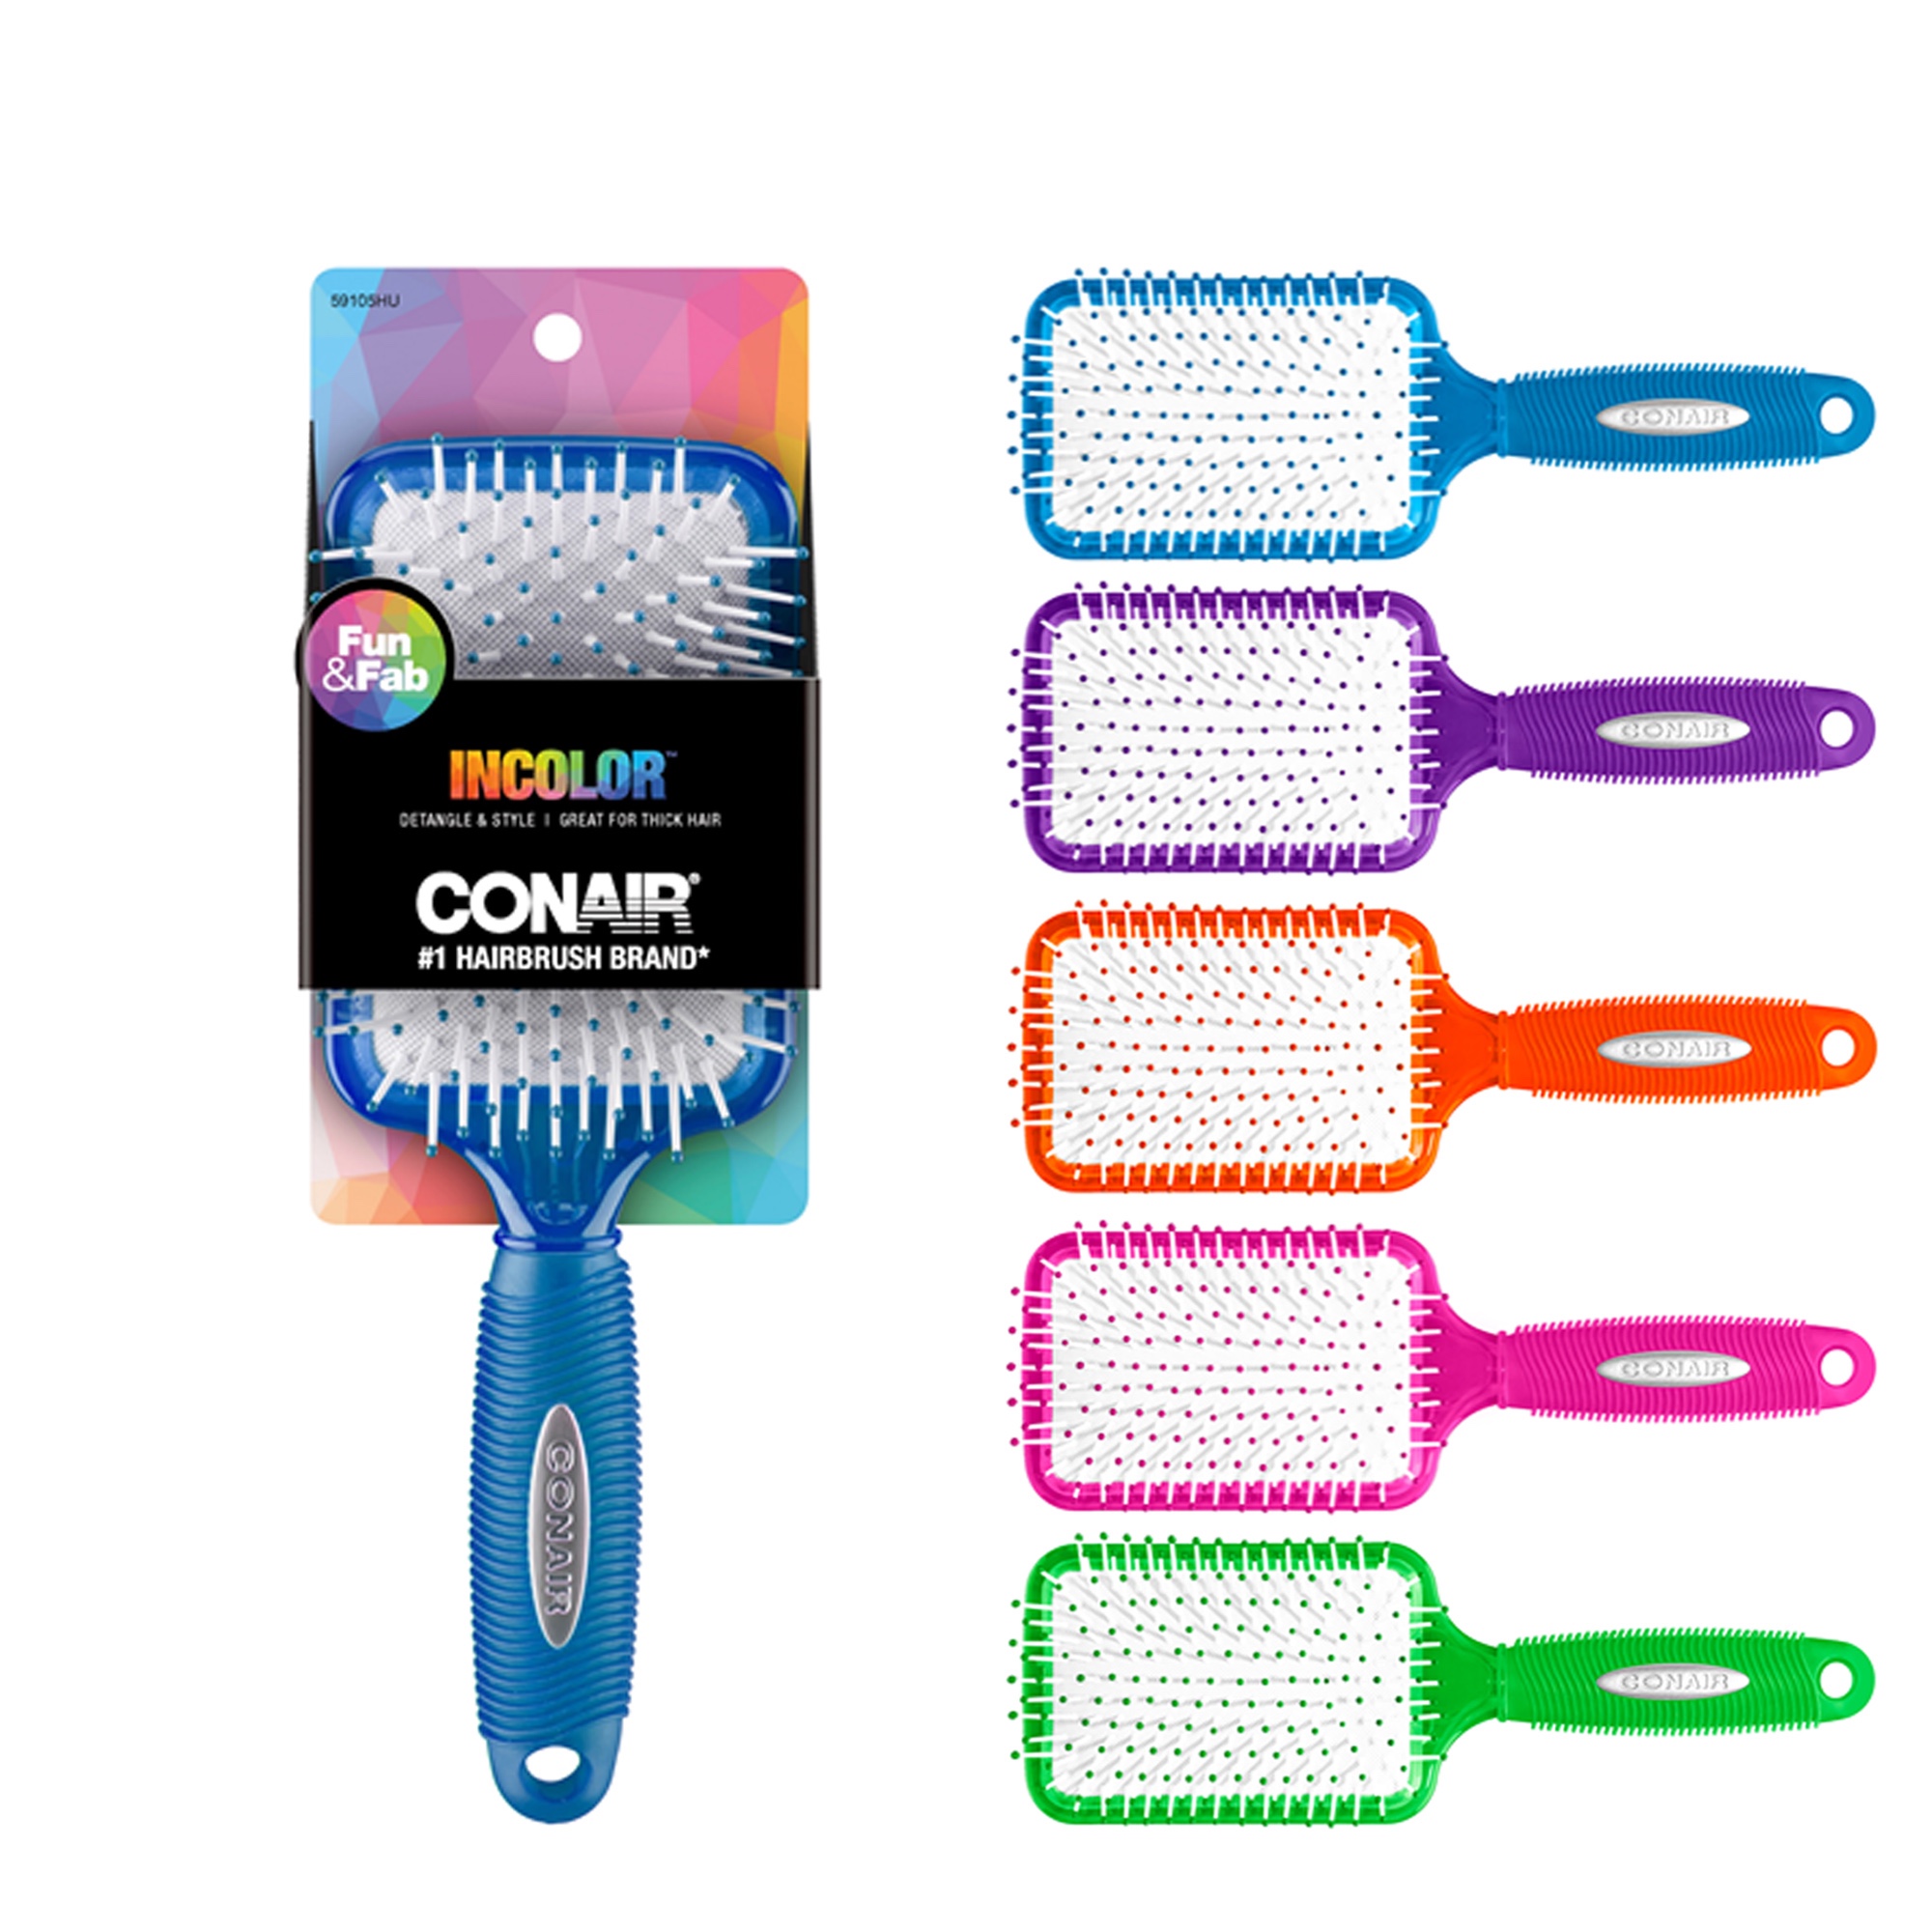 Conair in Color Nylon Bristle Paddle Hairbrush, Colors Vary - image 1 of 9